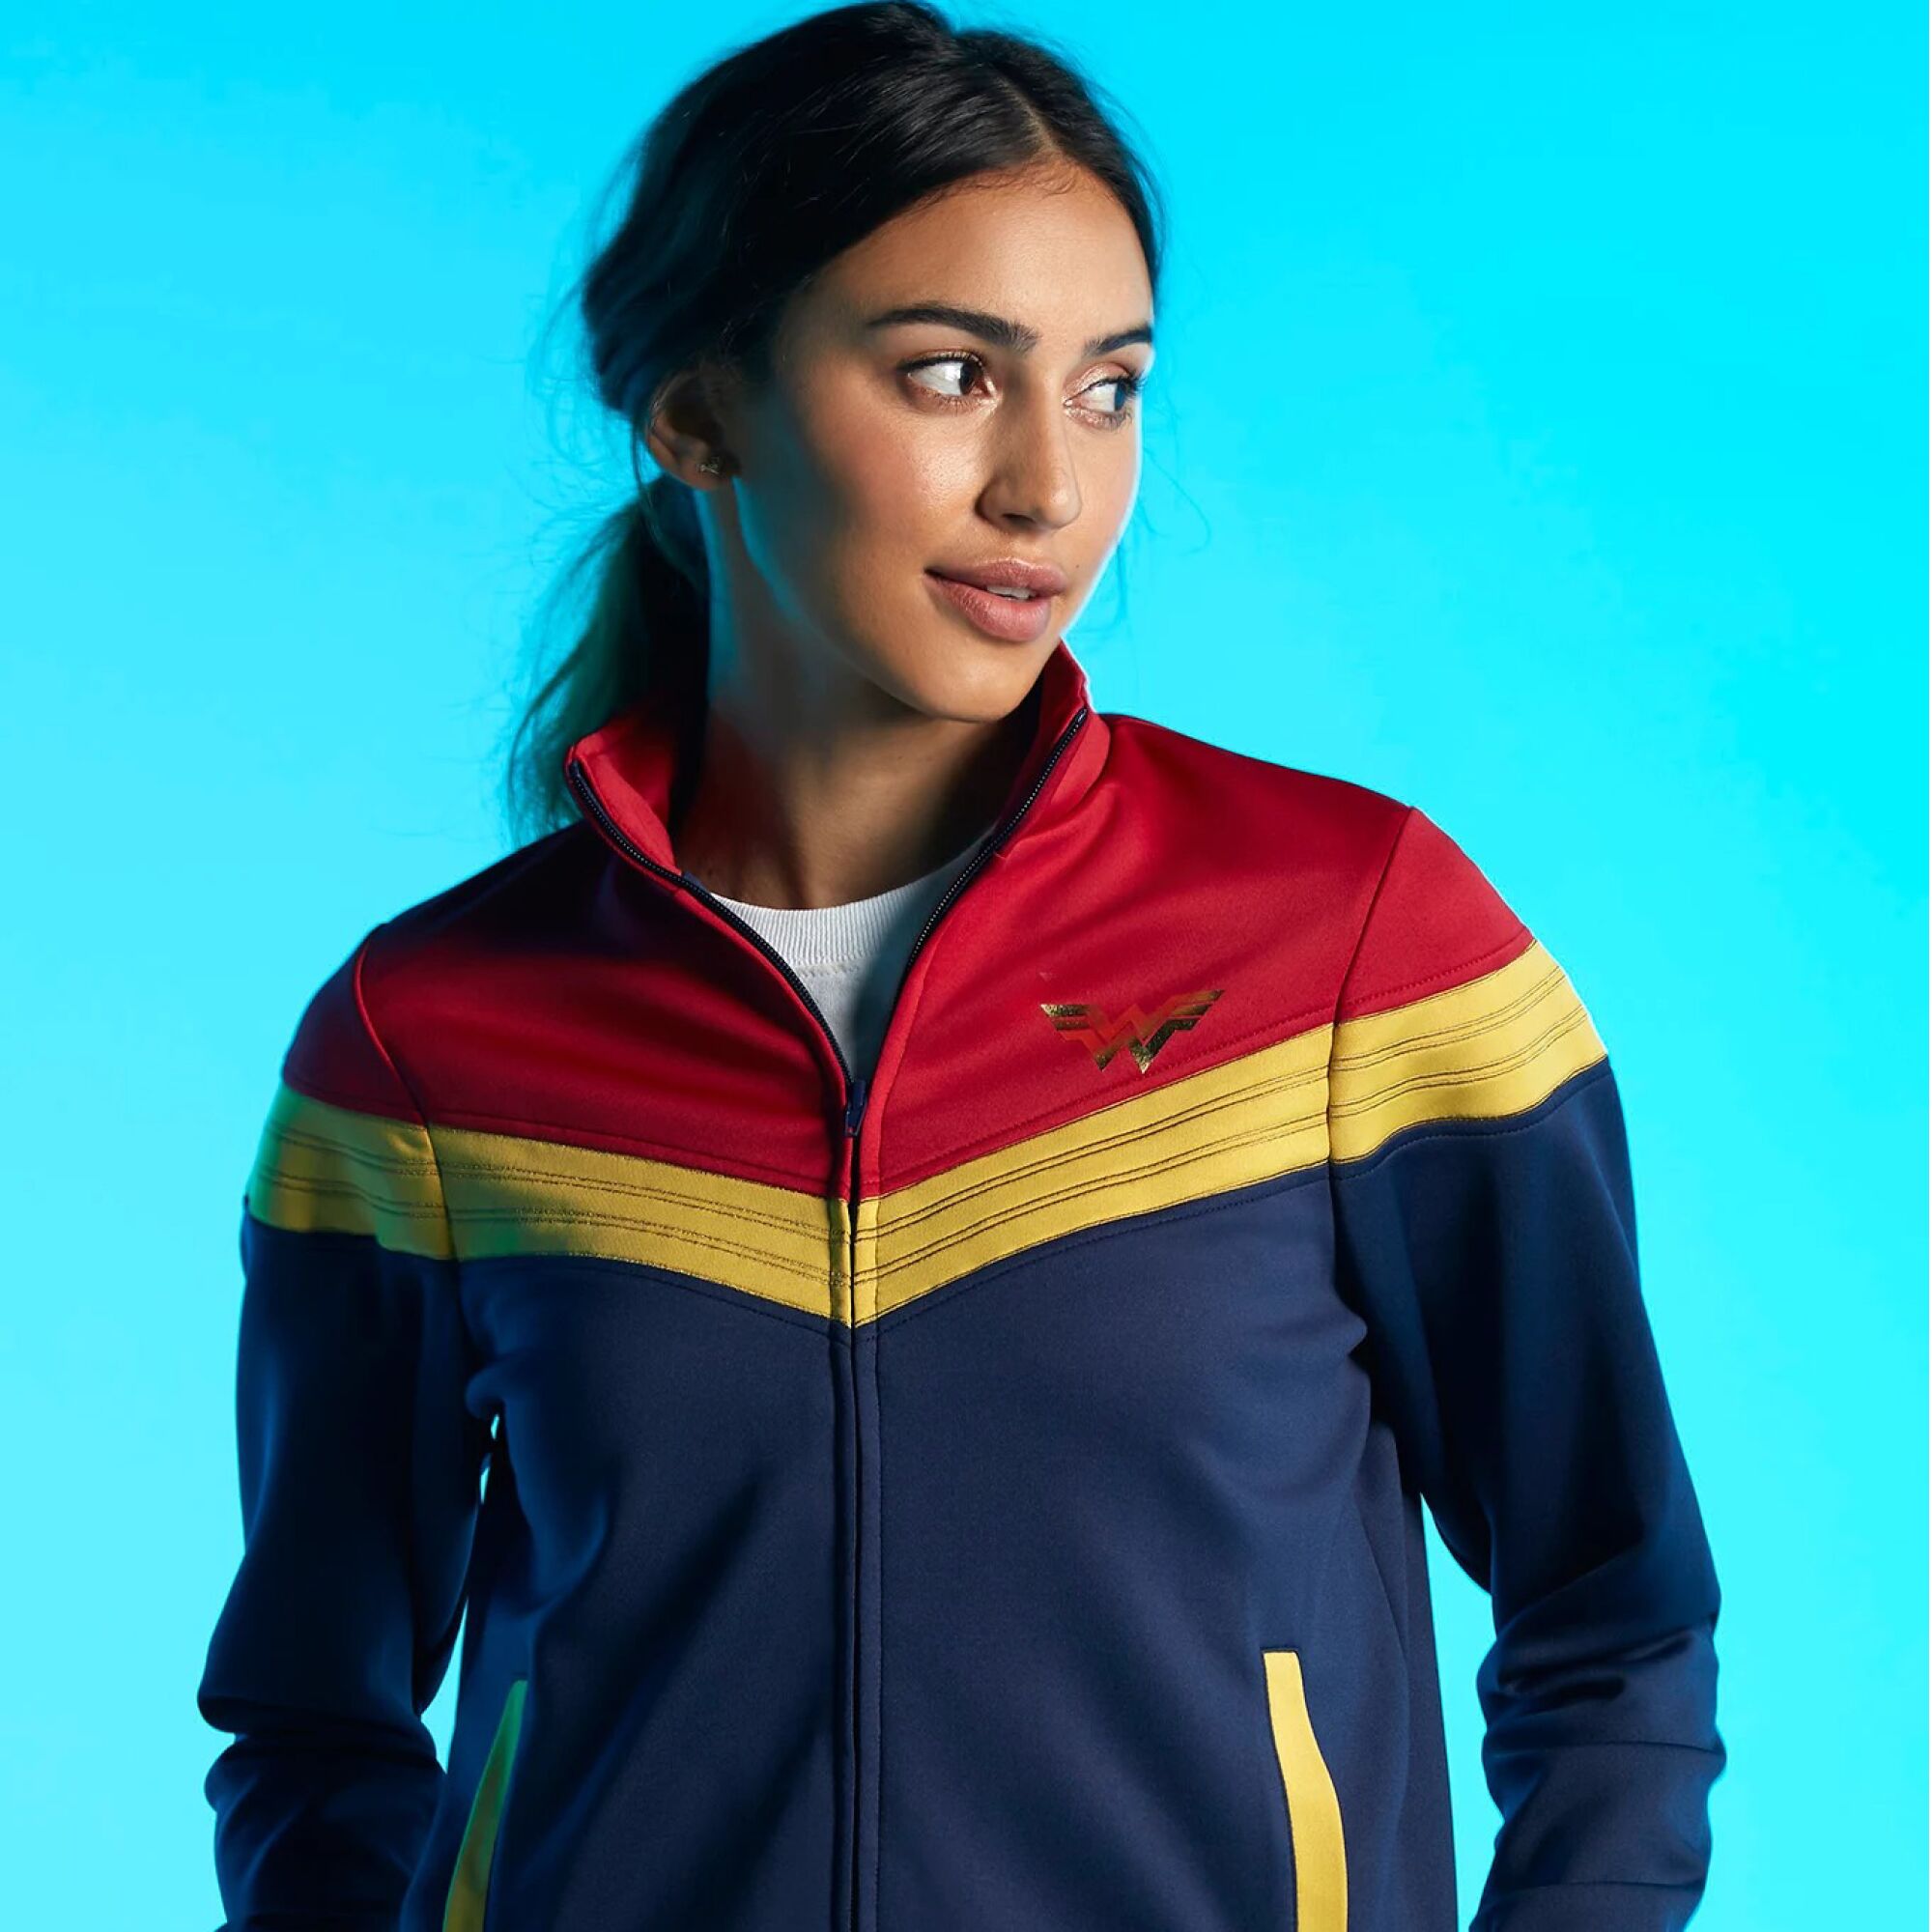 Her Universe's "Wonder Woman 1984" track jacket designed by 2019 Her Universe Fashion Show winner Adria Renee.